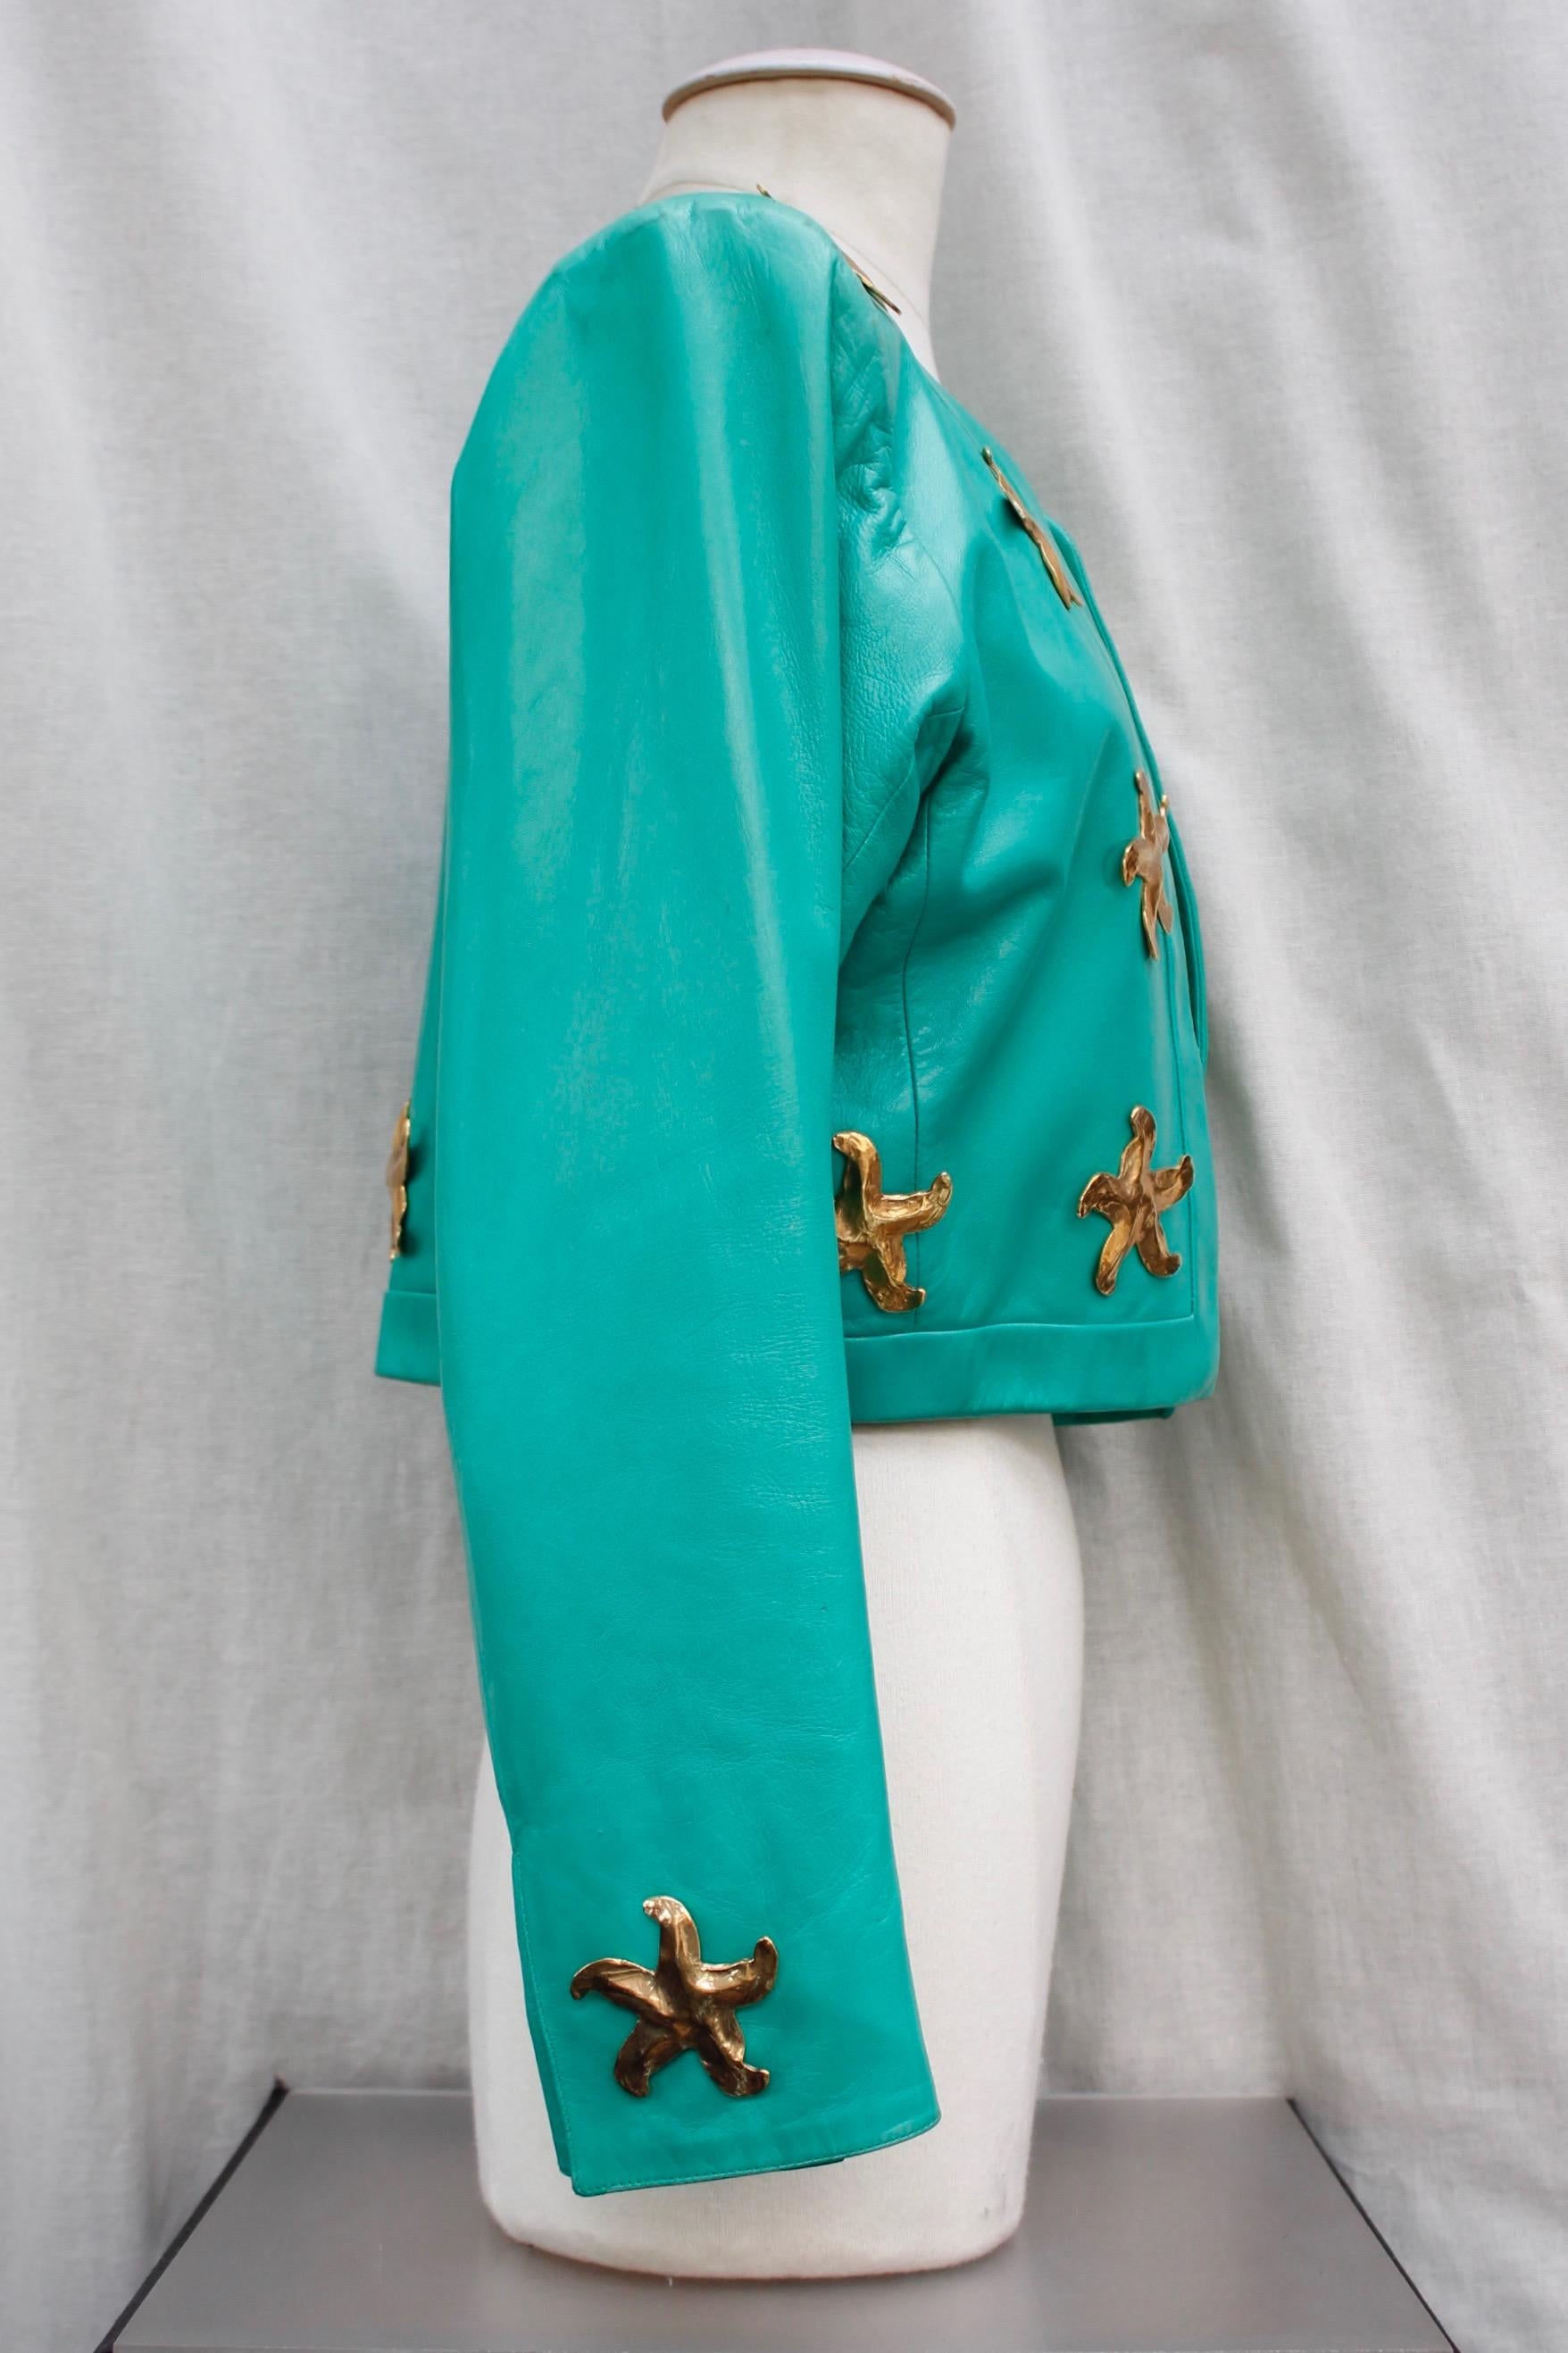 YVES SAINT LAURENT RIVE GAUCHE (Made in France) Beautiful long sleeve short jacket composed of turquoise/green lambskin. No collar.  It is decorated with large gilded metal starfish. Synthetic lining.

Circa 1980’s.

No indicated size, fits a 38 (US